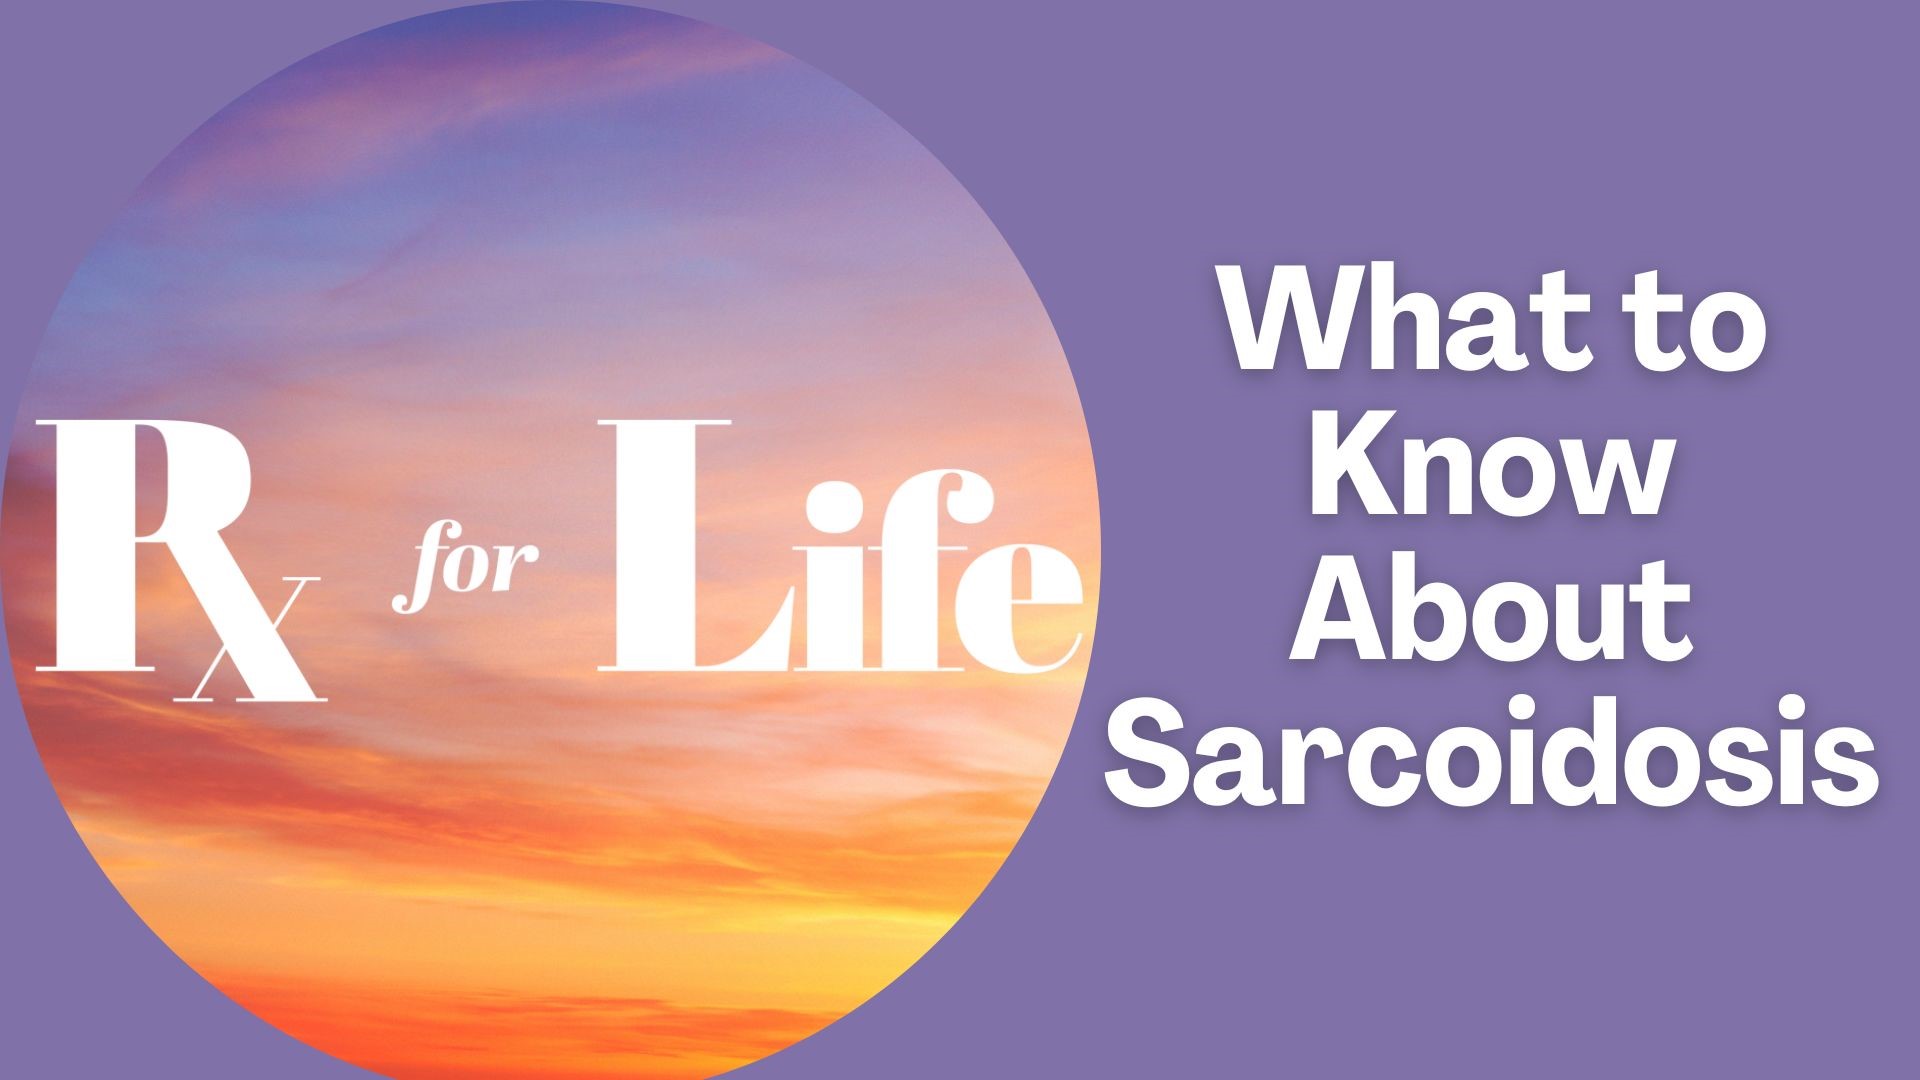 Monica Robins sits down with a Cleveland Clinic doctor to learn about sarcoidosis and how it is diagnosed. Learn who is at risk, how to treat it and more.